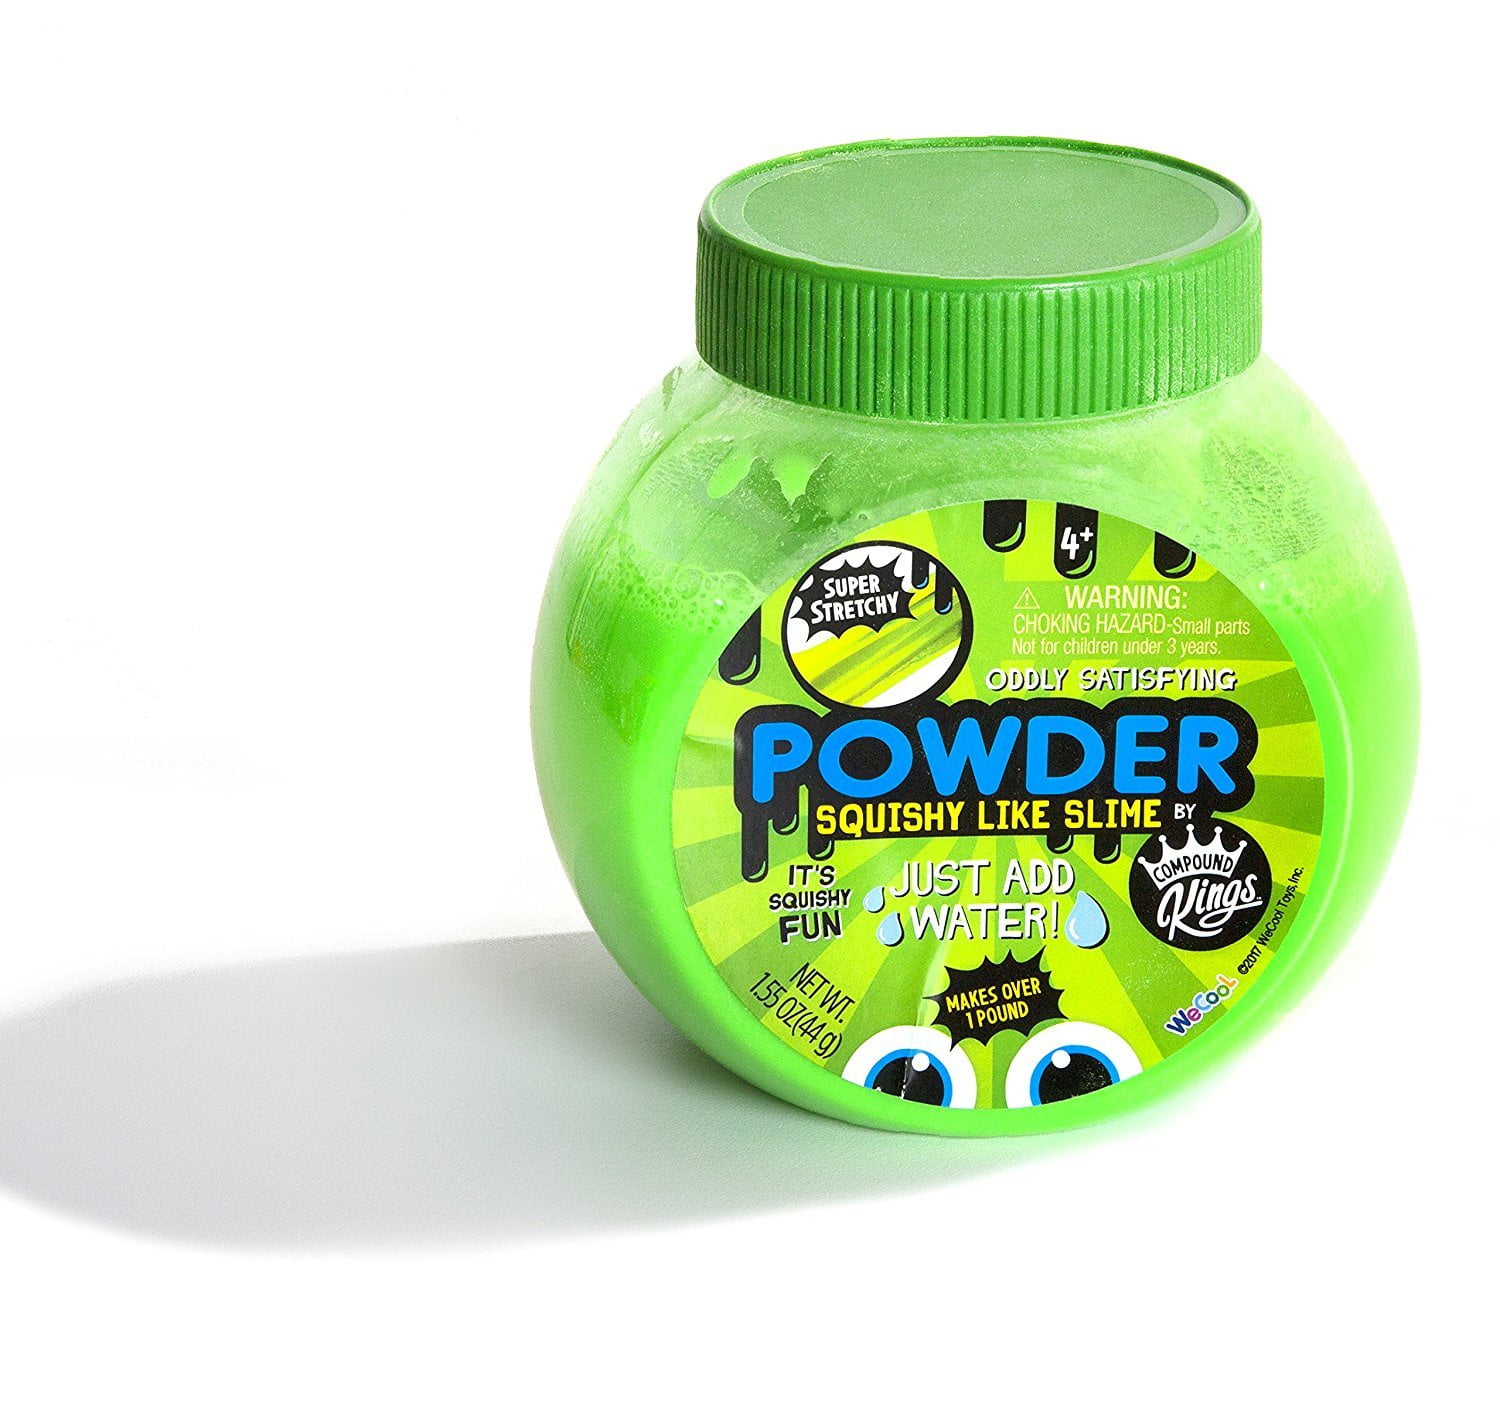 Green Slime Powder: Yields 1lb of Squishy Slime by Compound Kings 